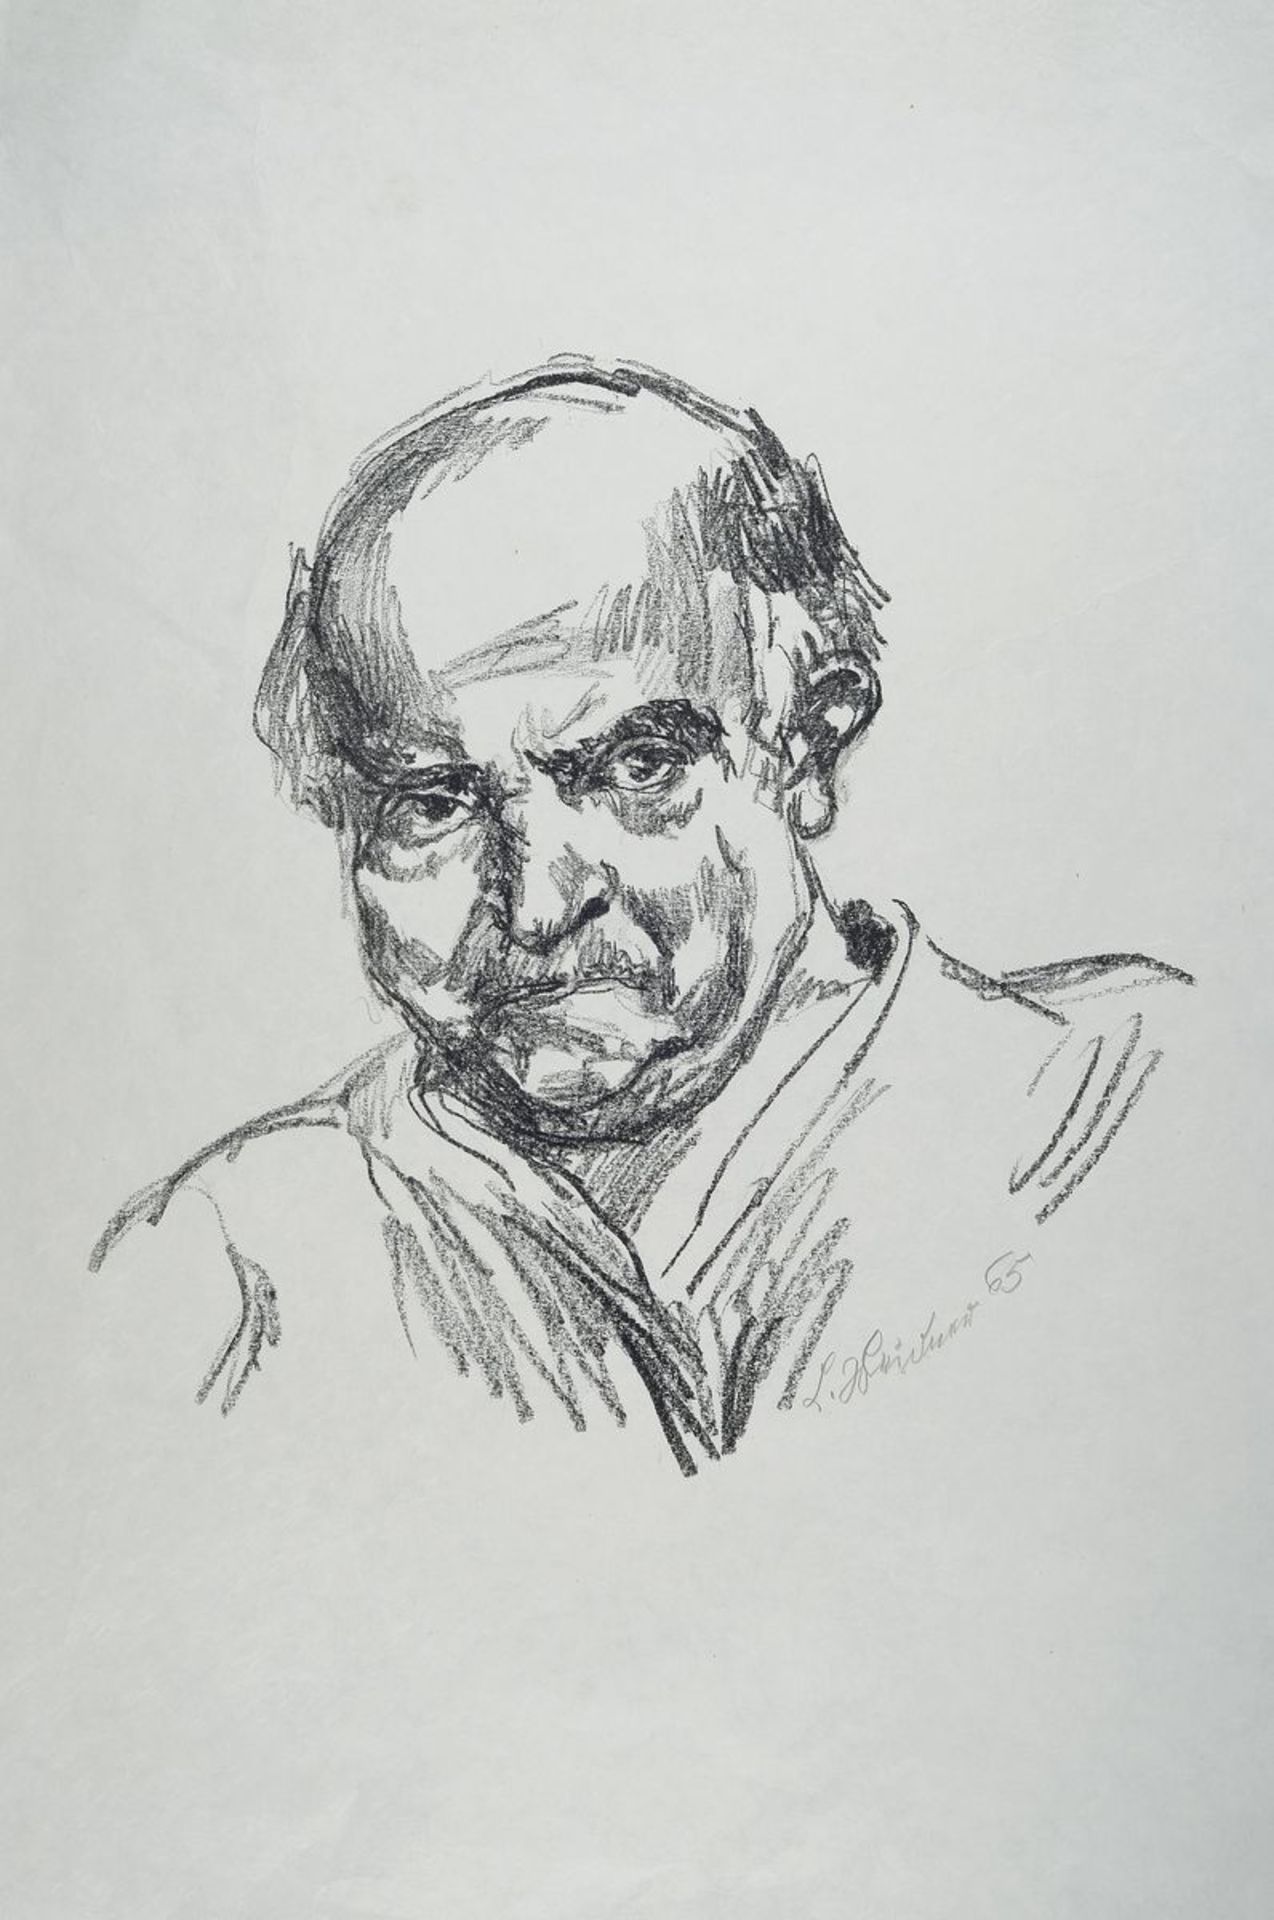 Ludwig Meidner, 1884-1966, Lithografie, Selbstporträt,sign., dat. 65, ca. 75,5x53,5 cmLudwig